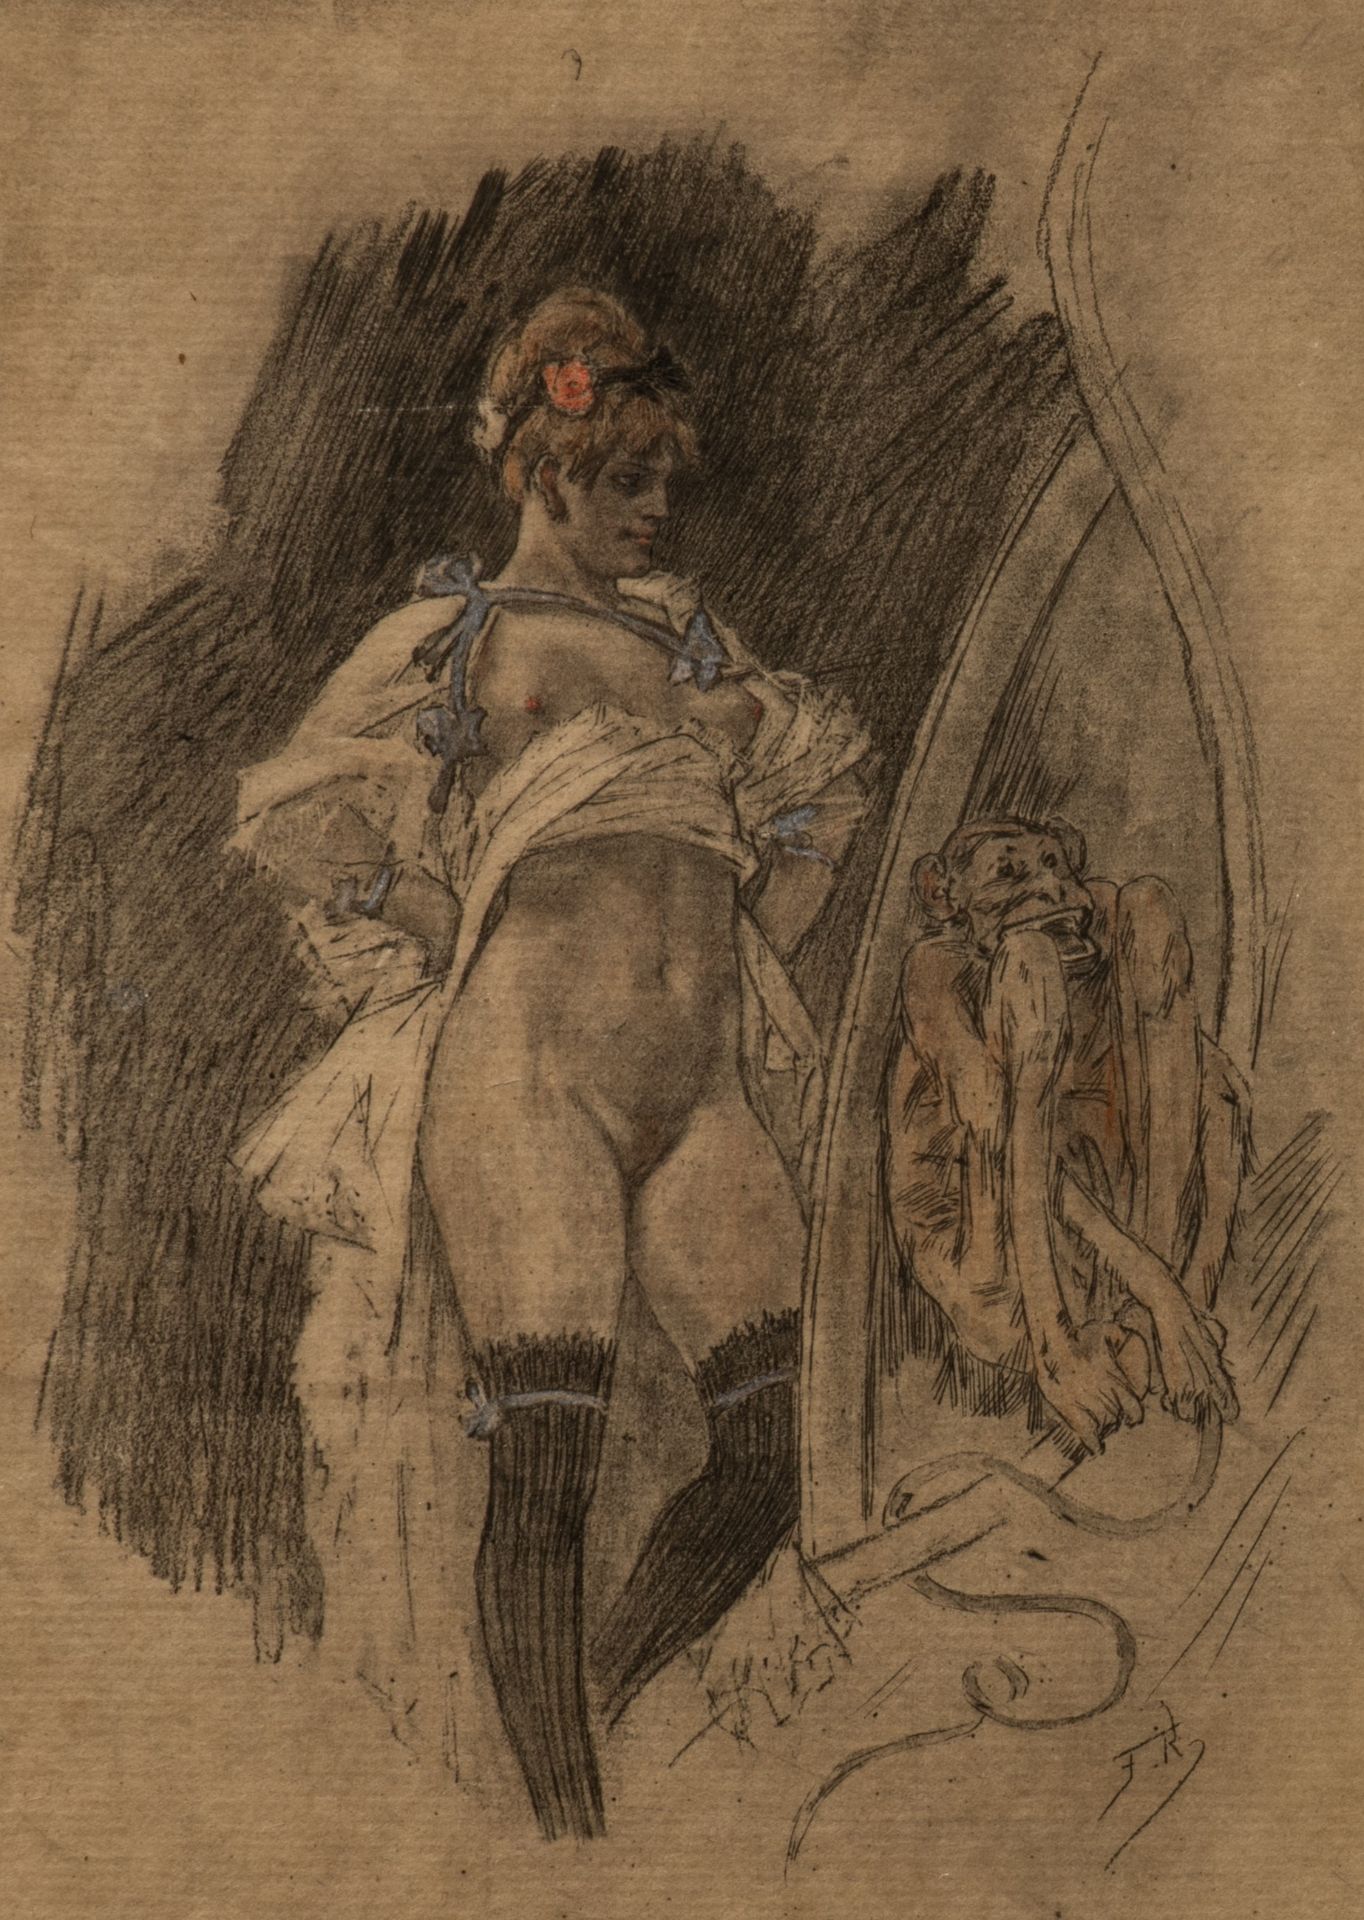 Felicien Rops (1833-1898), Impudence, print-multiple on paper 20.2 x 14.2 cm. (7.9 x 5.5 in.)